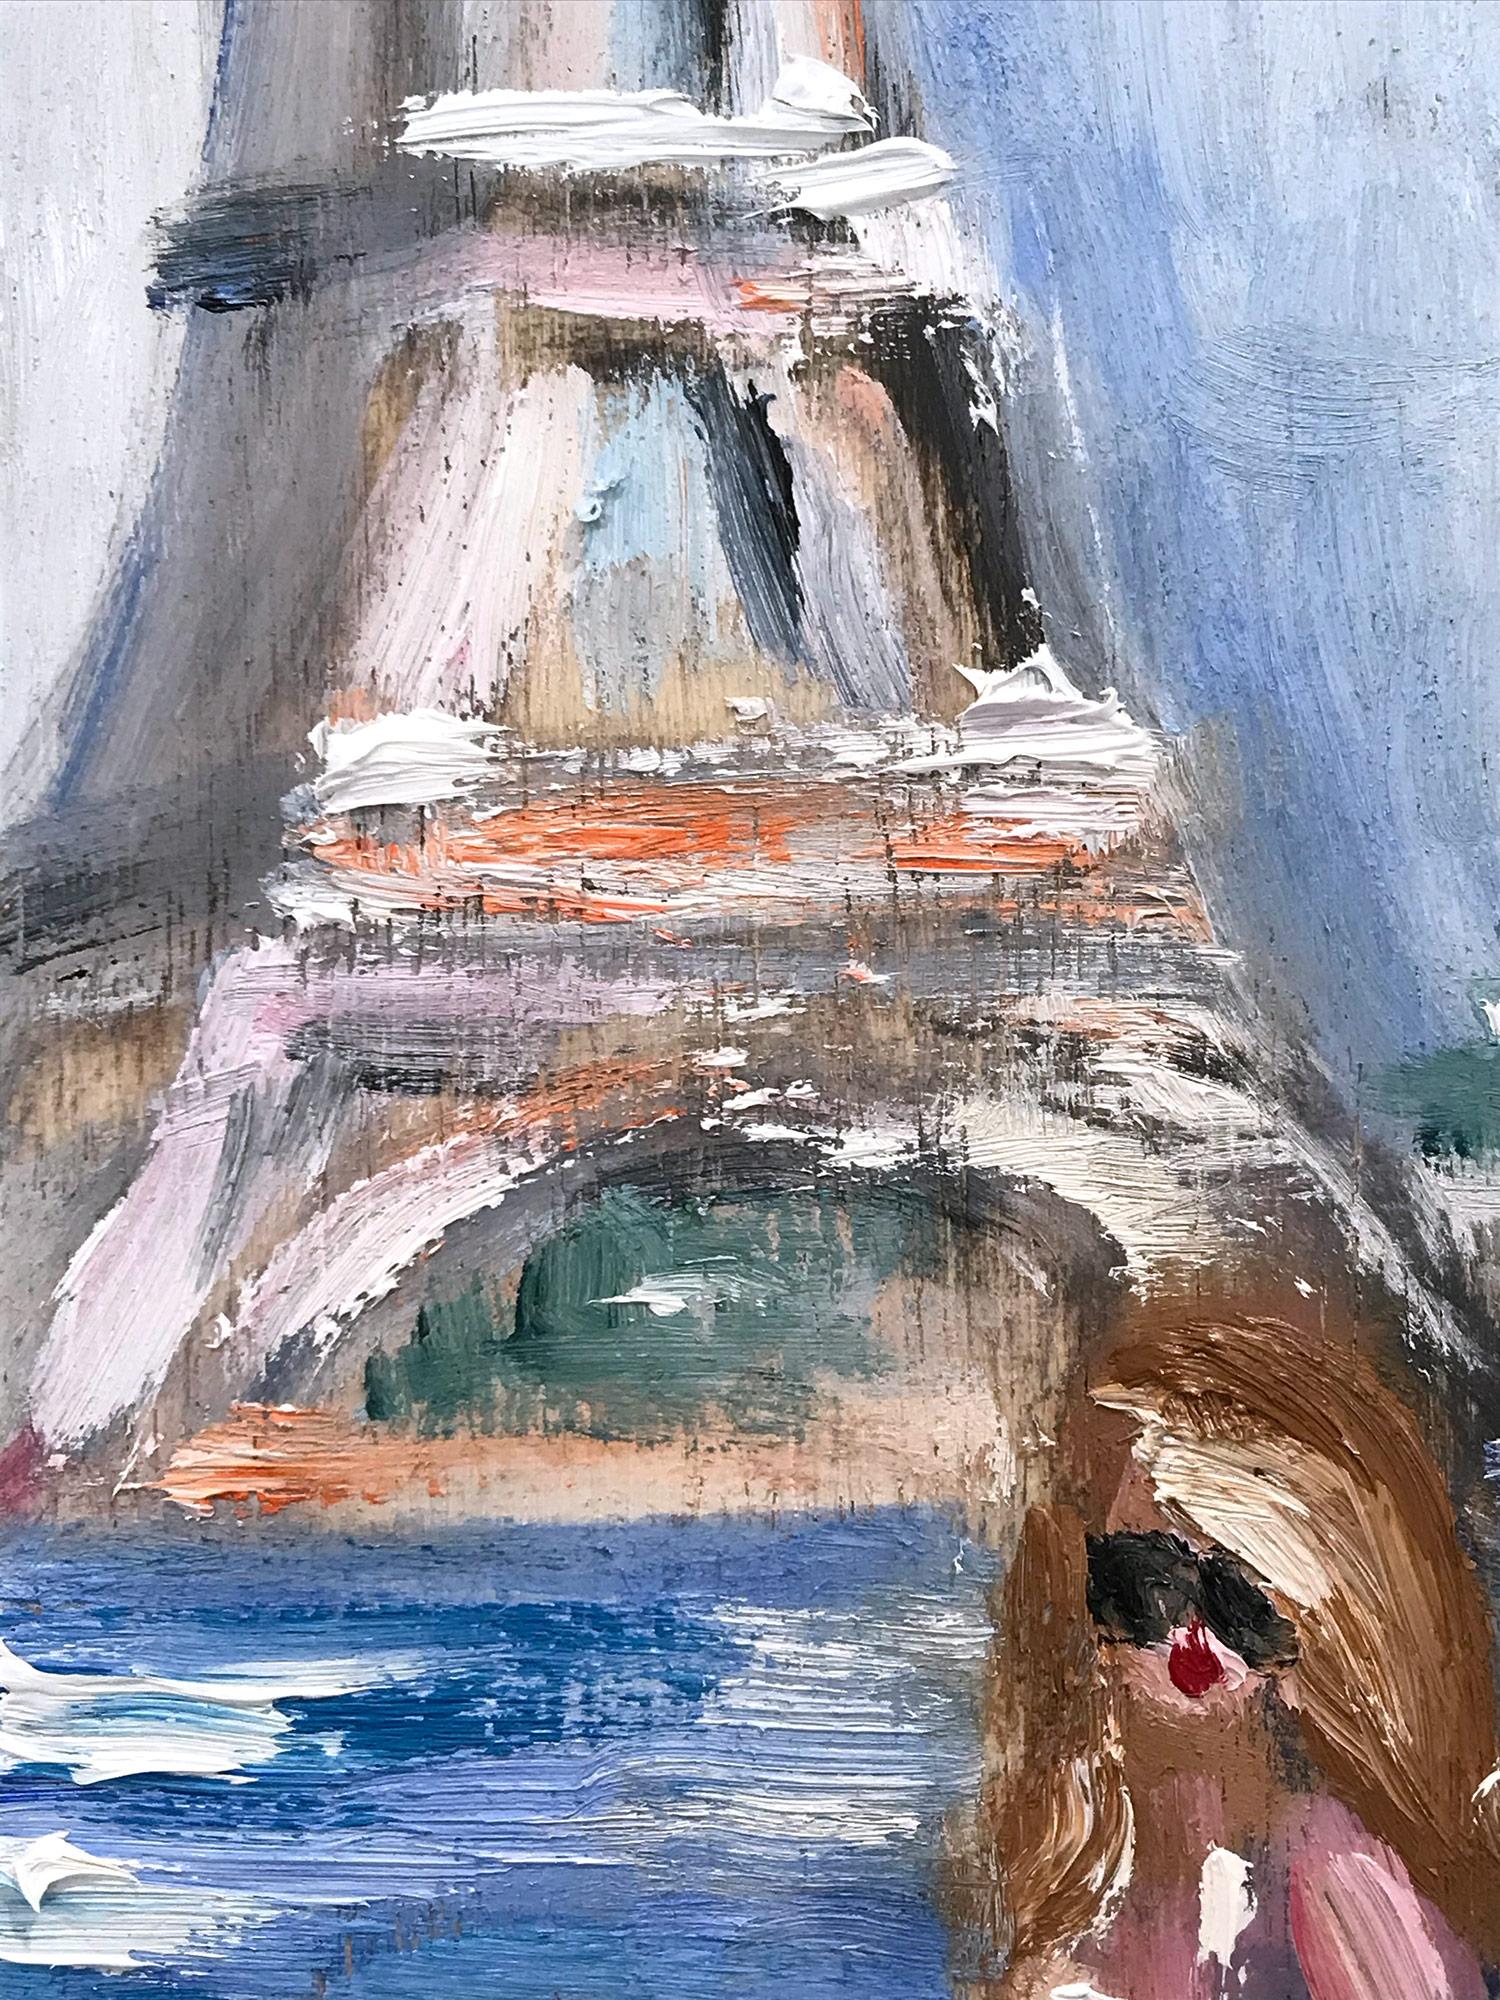 This painting depicts an impressionistic Plein Air scene of a young woman by the Eiffel Tower Sunbathing. The thick brush strokes and fun marks creates an atmosphere reminiscent of the impressionists from the 20th Century. She soaks up the sun in a